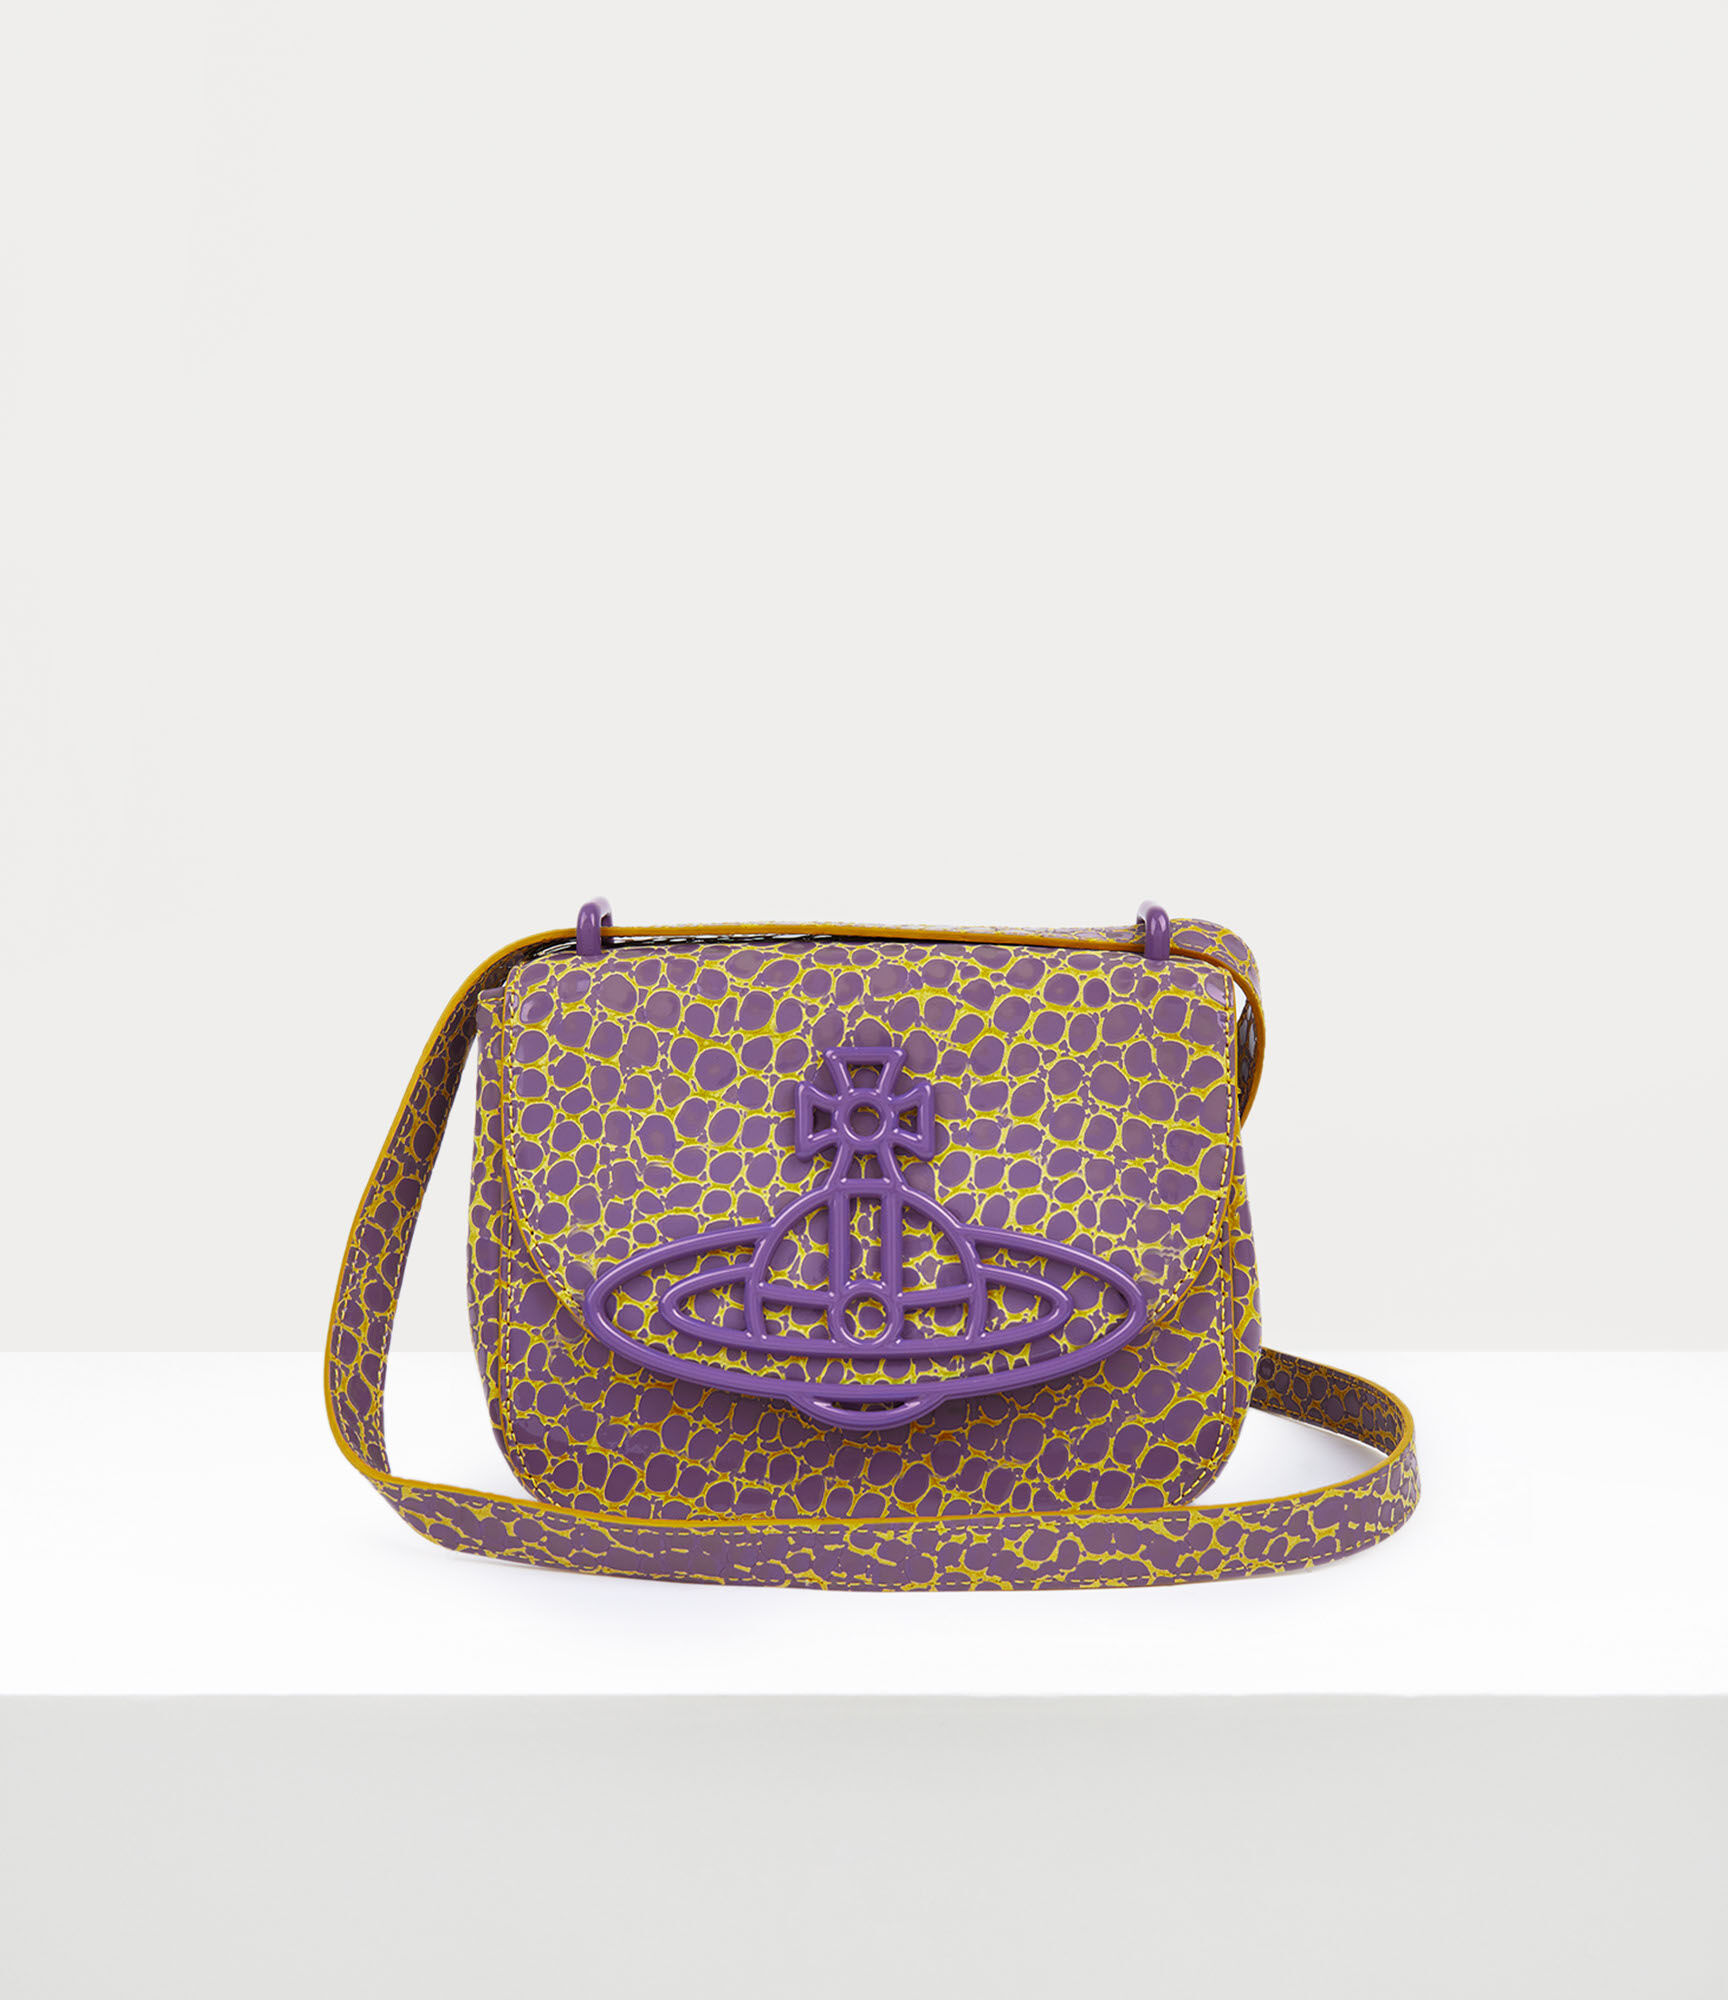 Designer Bags for Women | Large and Small Bags | Vivienne Westwood®